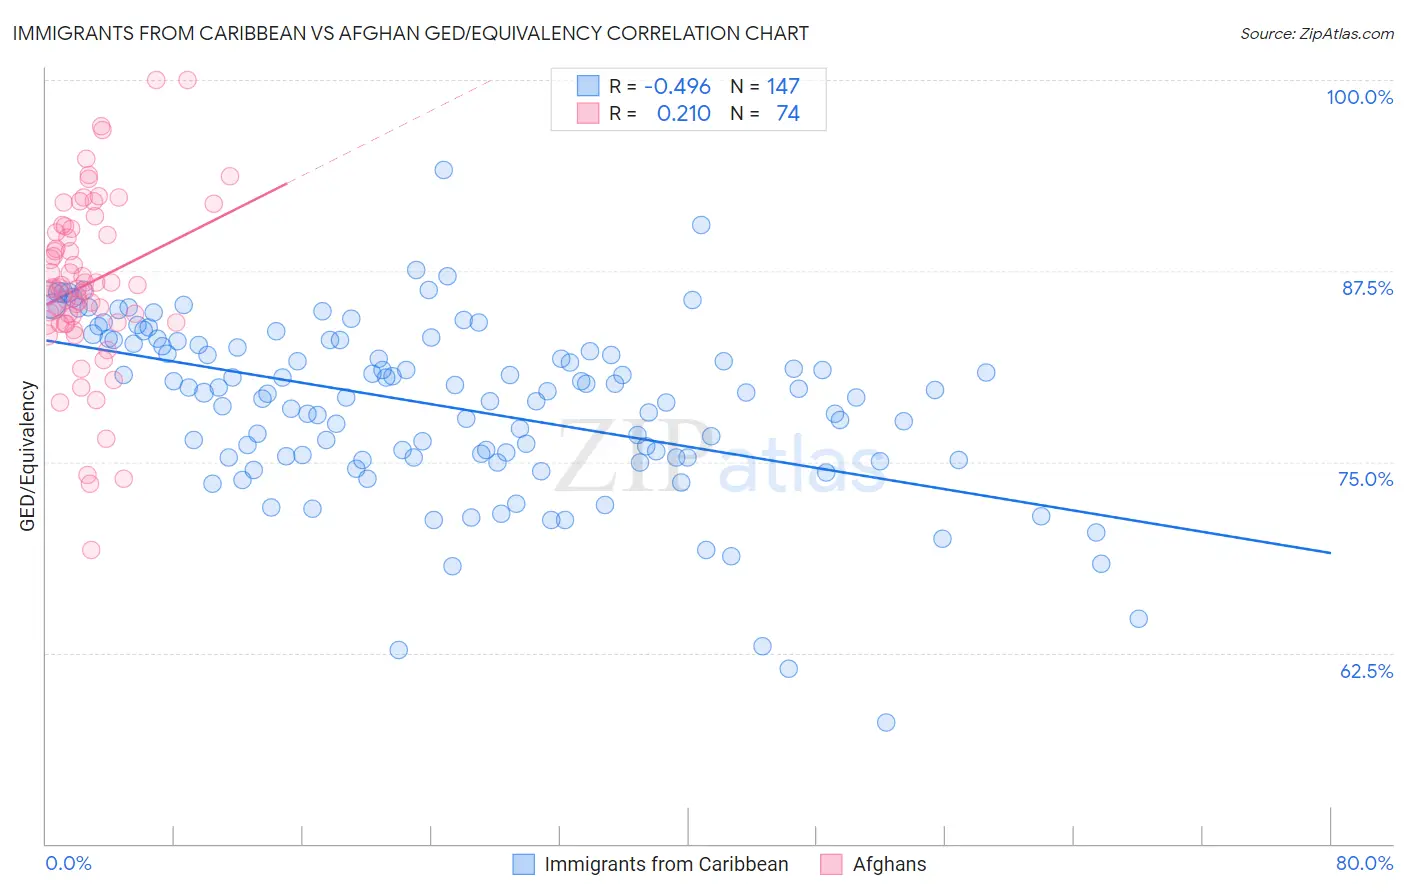 Immigrants from Caribbean vs Afghan GED/Equivalency